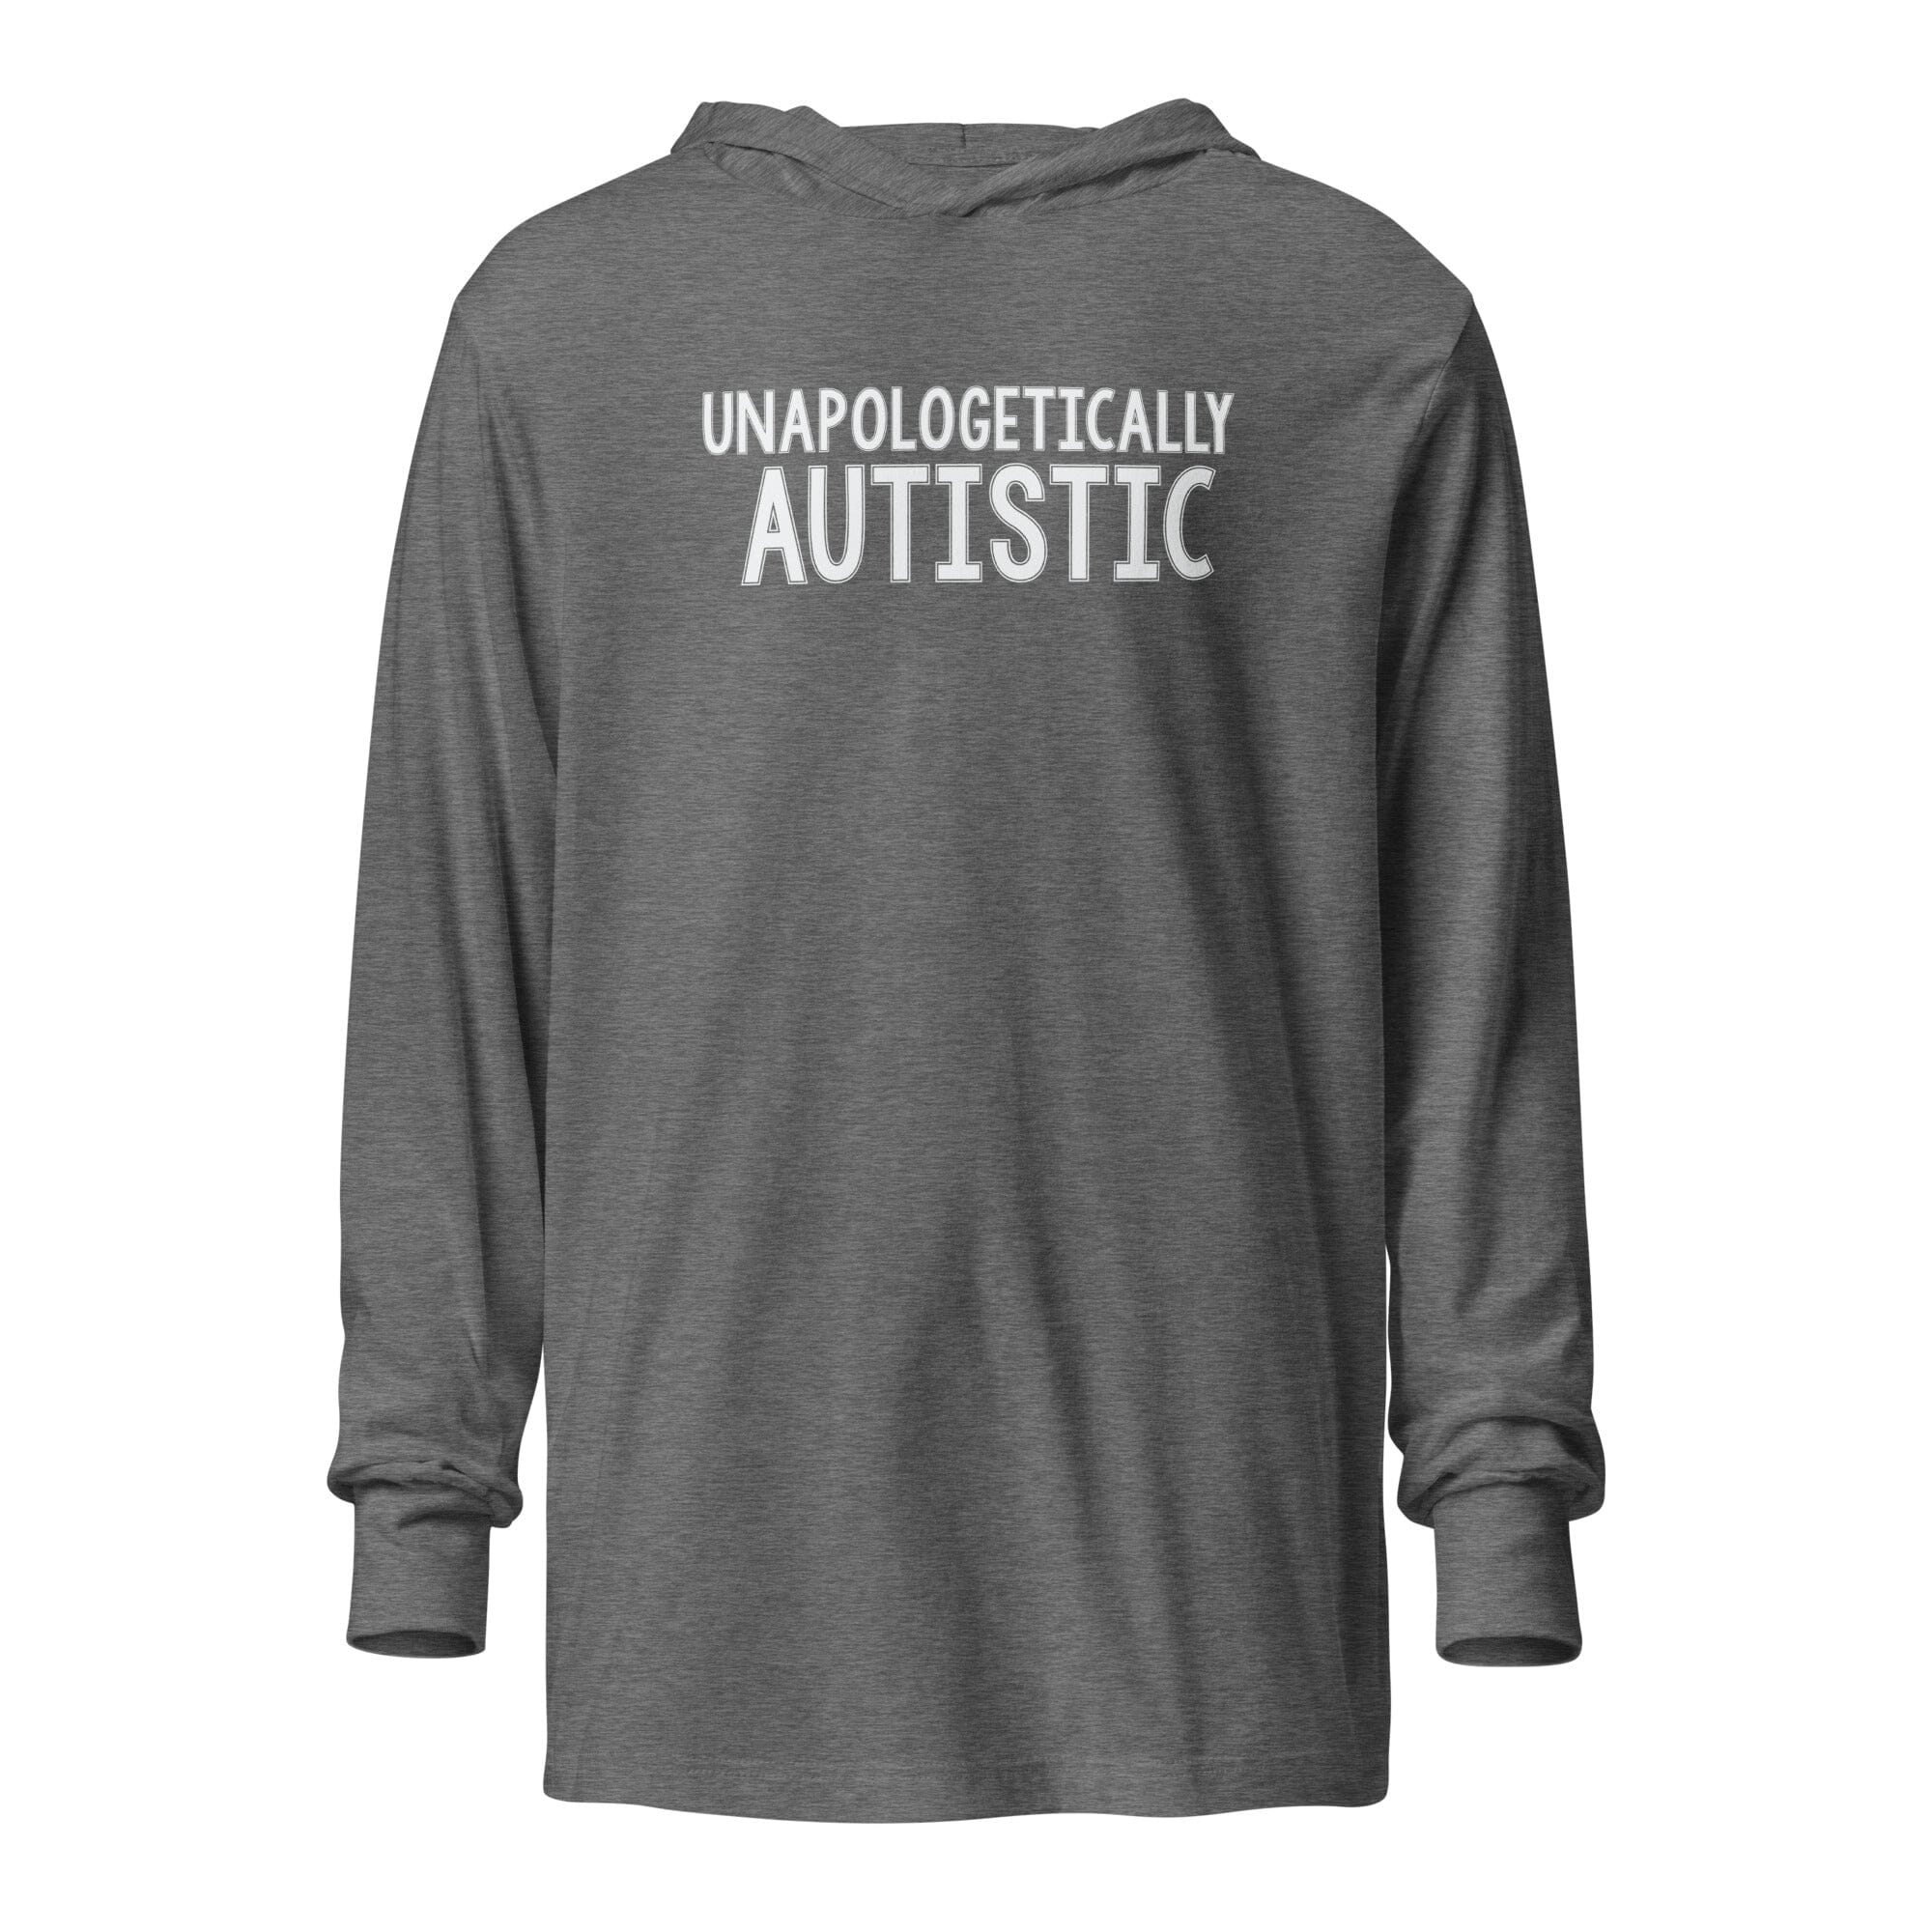 Unapologetically Autistic Unisex Hooded long-sleeve tee The Autistic Innovator Grey Triblend XS 